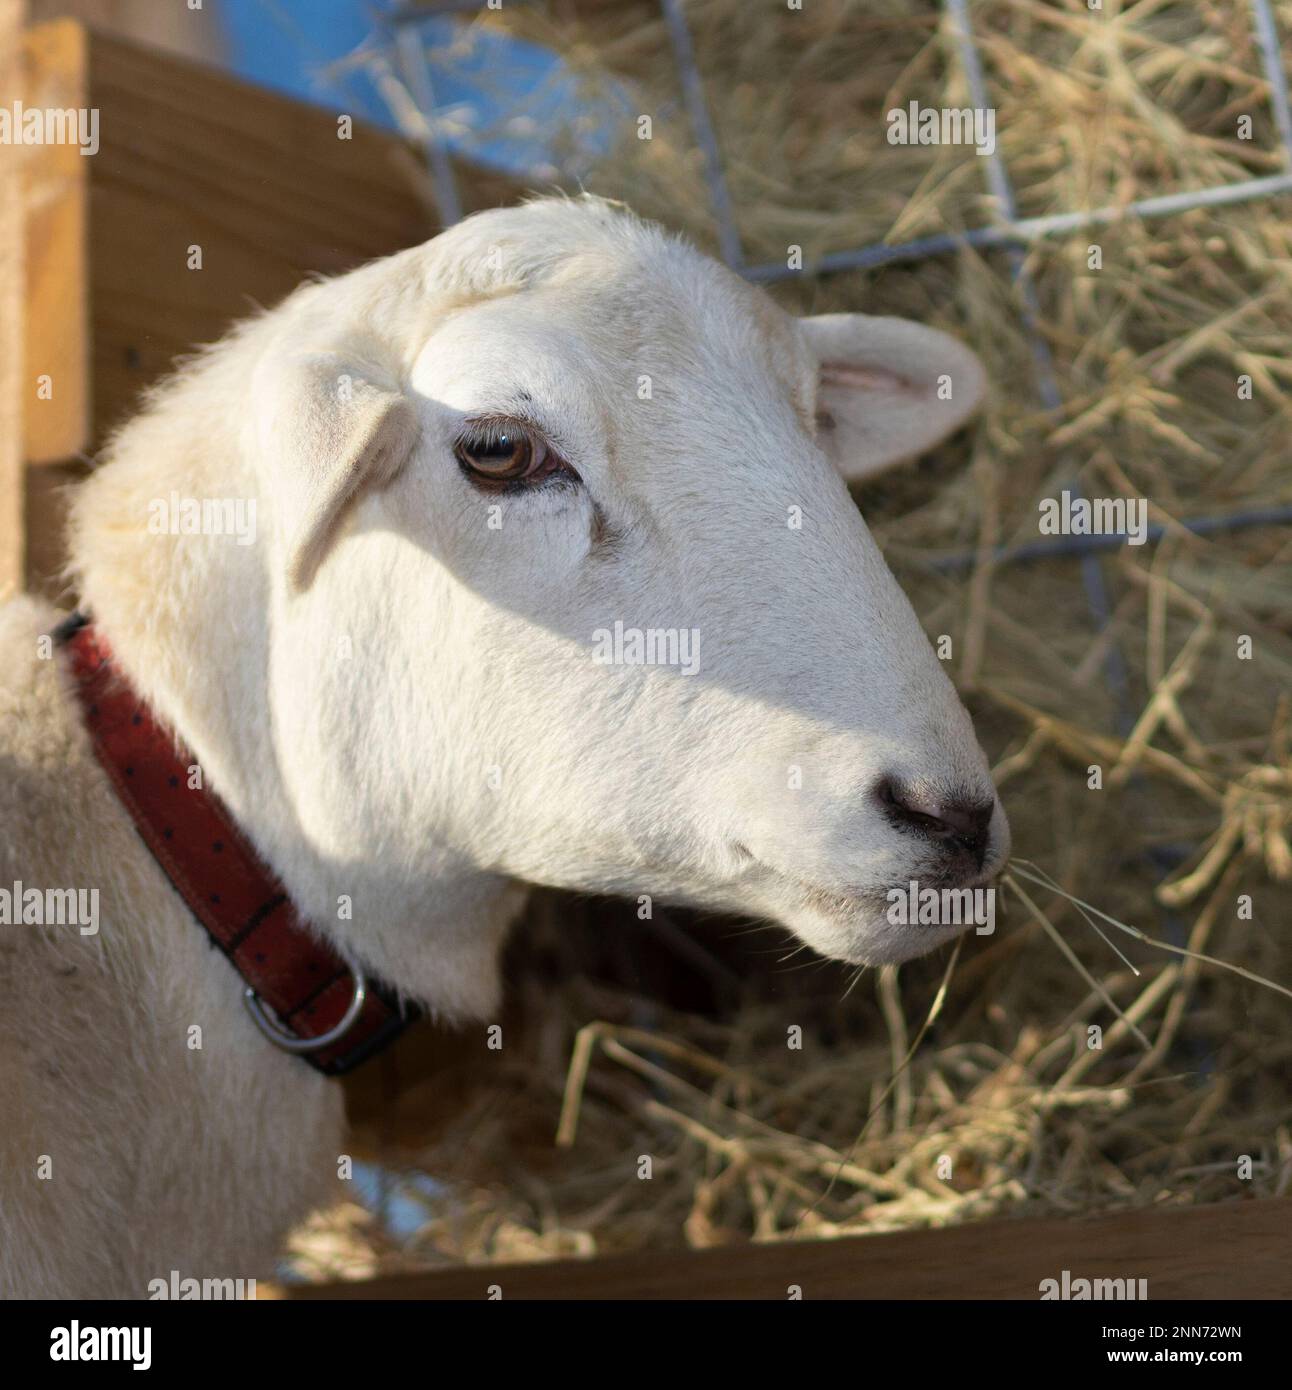 This Katahdin sheeep is chewing on a few strands of hay while relaxing by the feeder Stock Photo